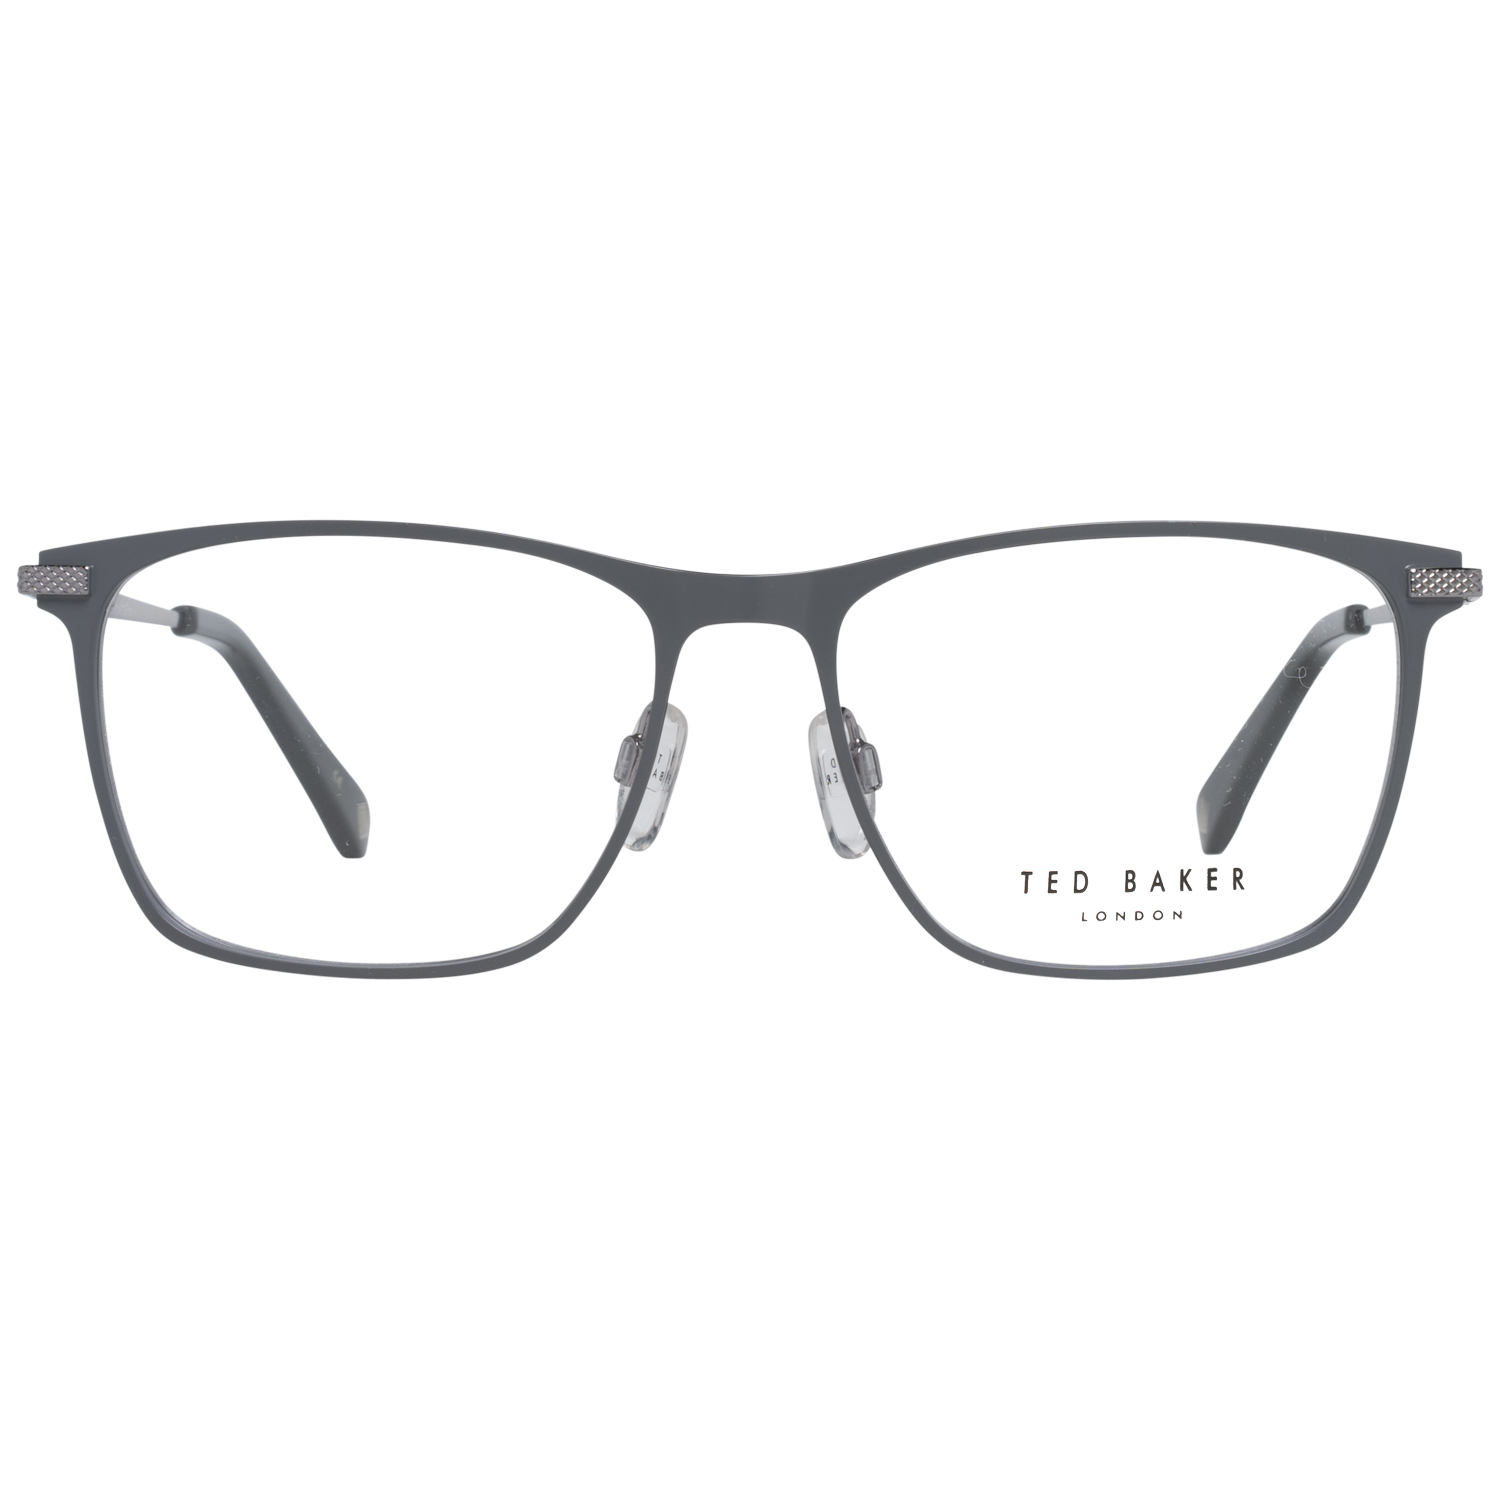 Ted Baker Rectangular Mens Gunmetal TB4276 Bower Glasses are a modern rectangular style crafted from lightweight metal. The soft nose pads and plastic temple tips provide comfort for all day use. Ted Baker's logo is embedded into the slender temples for authenticity.